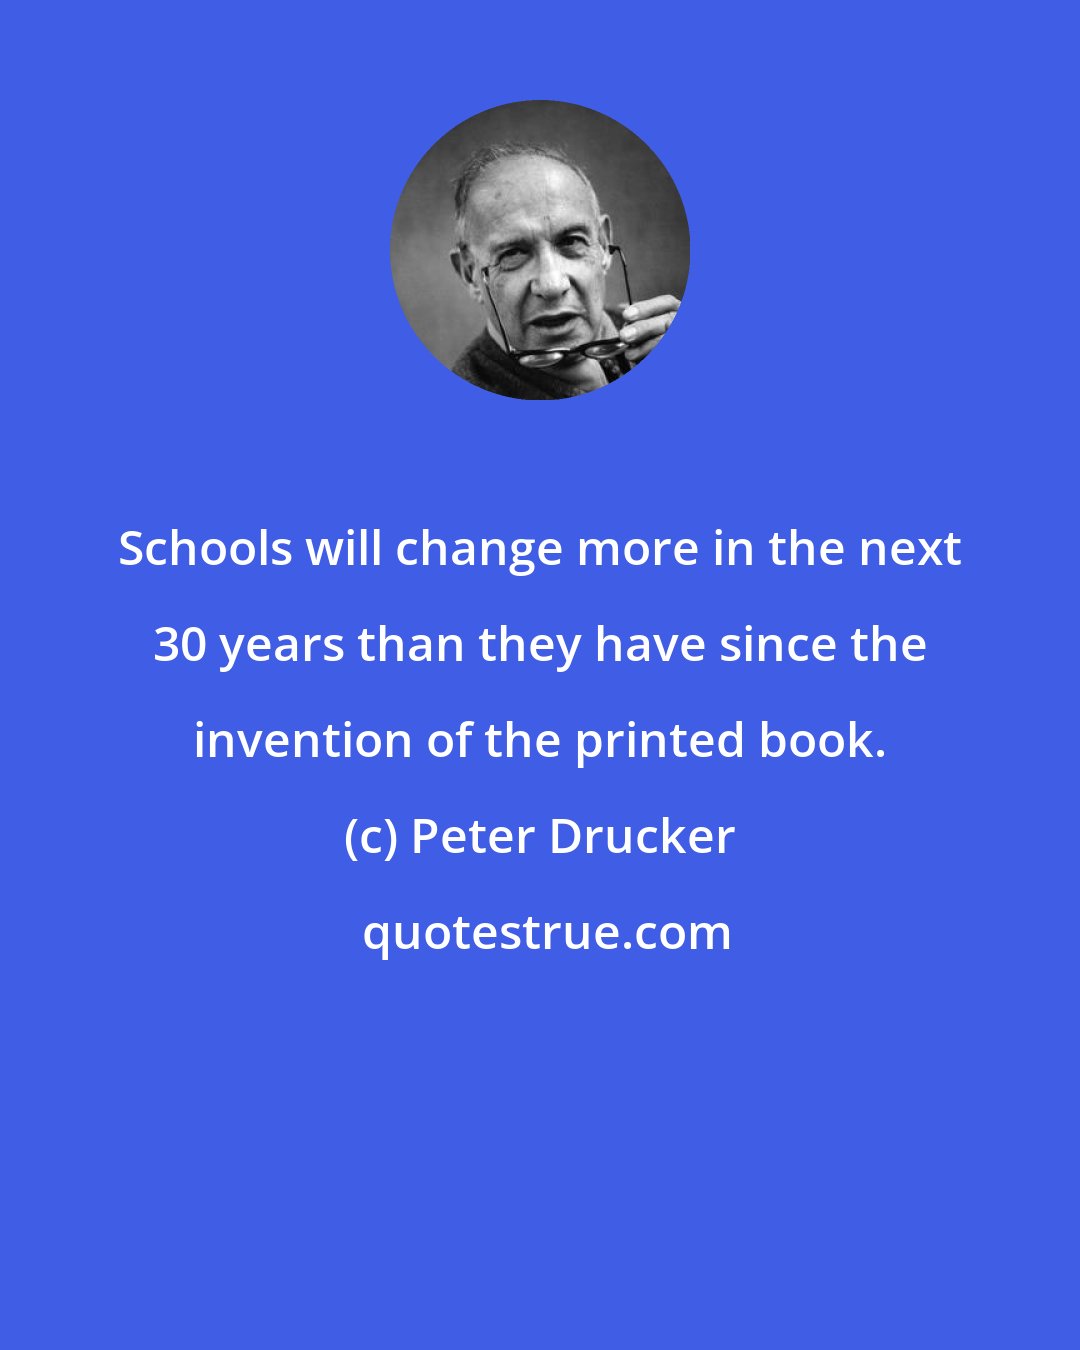 Peter Drucker: Schools will change more in the next 30 years than they have since the invention of the printed book.